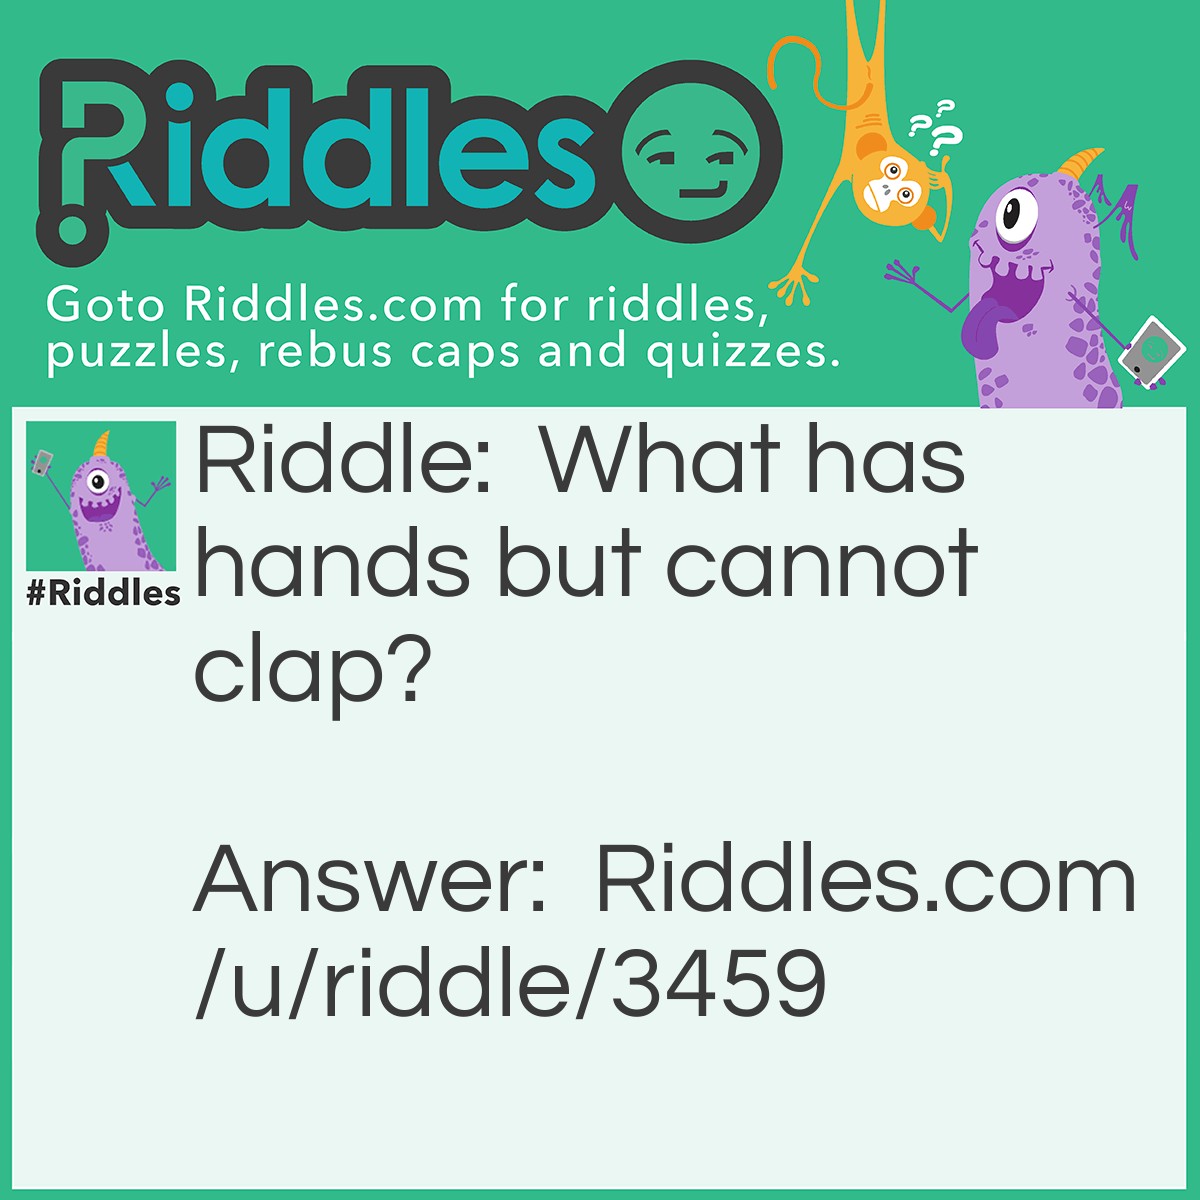 Riddle: What has hands but cannot clap? Answer: A clock.